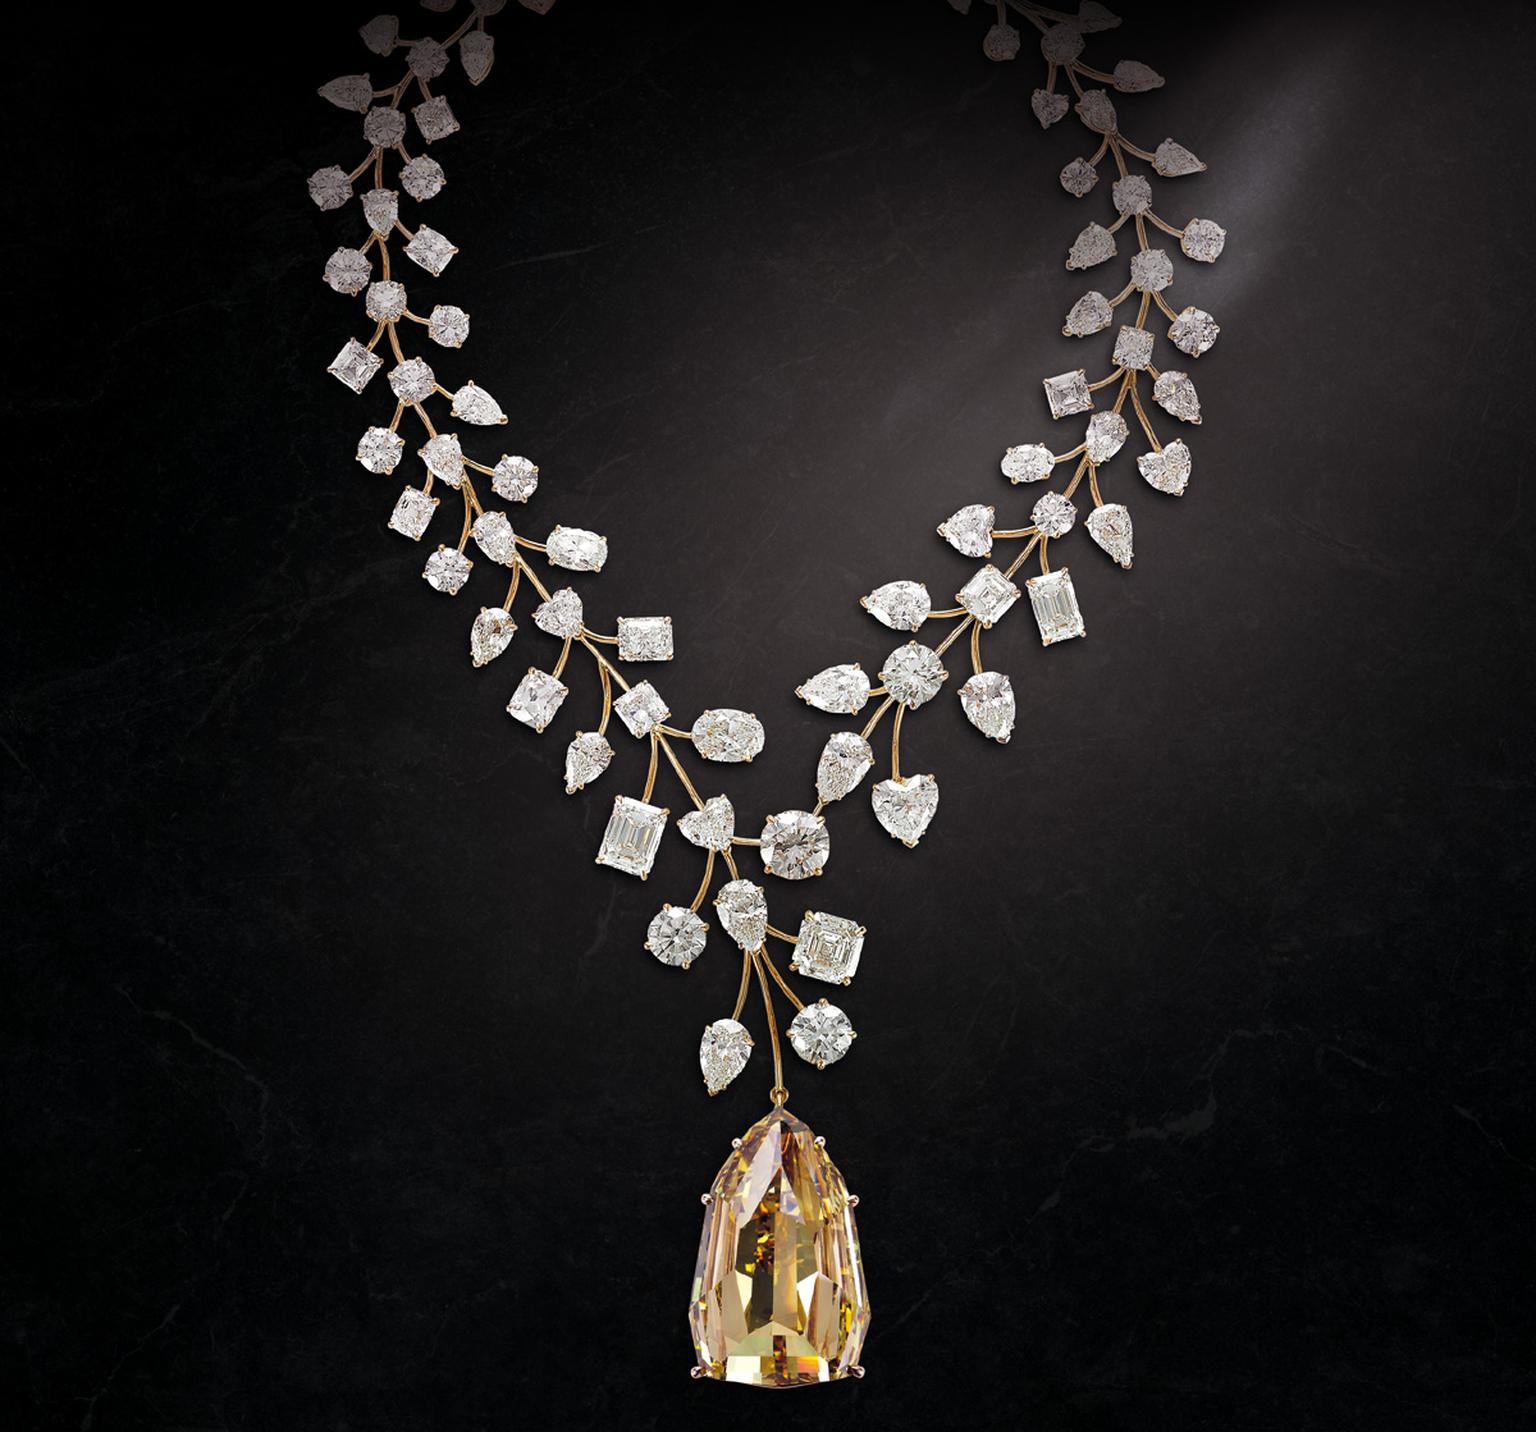 The record-breaking Incomparable yellow diamond necklace by ...